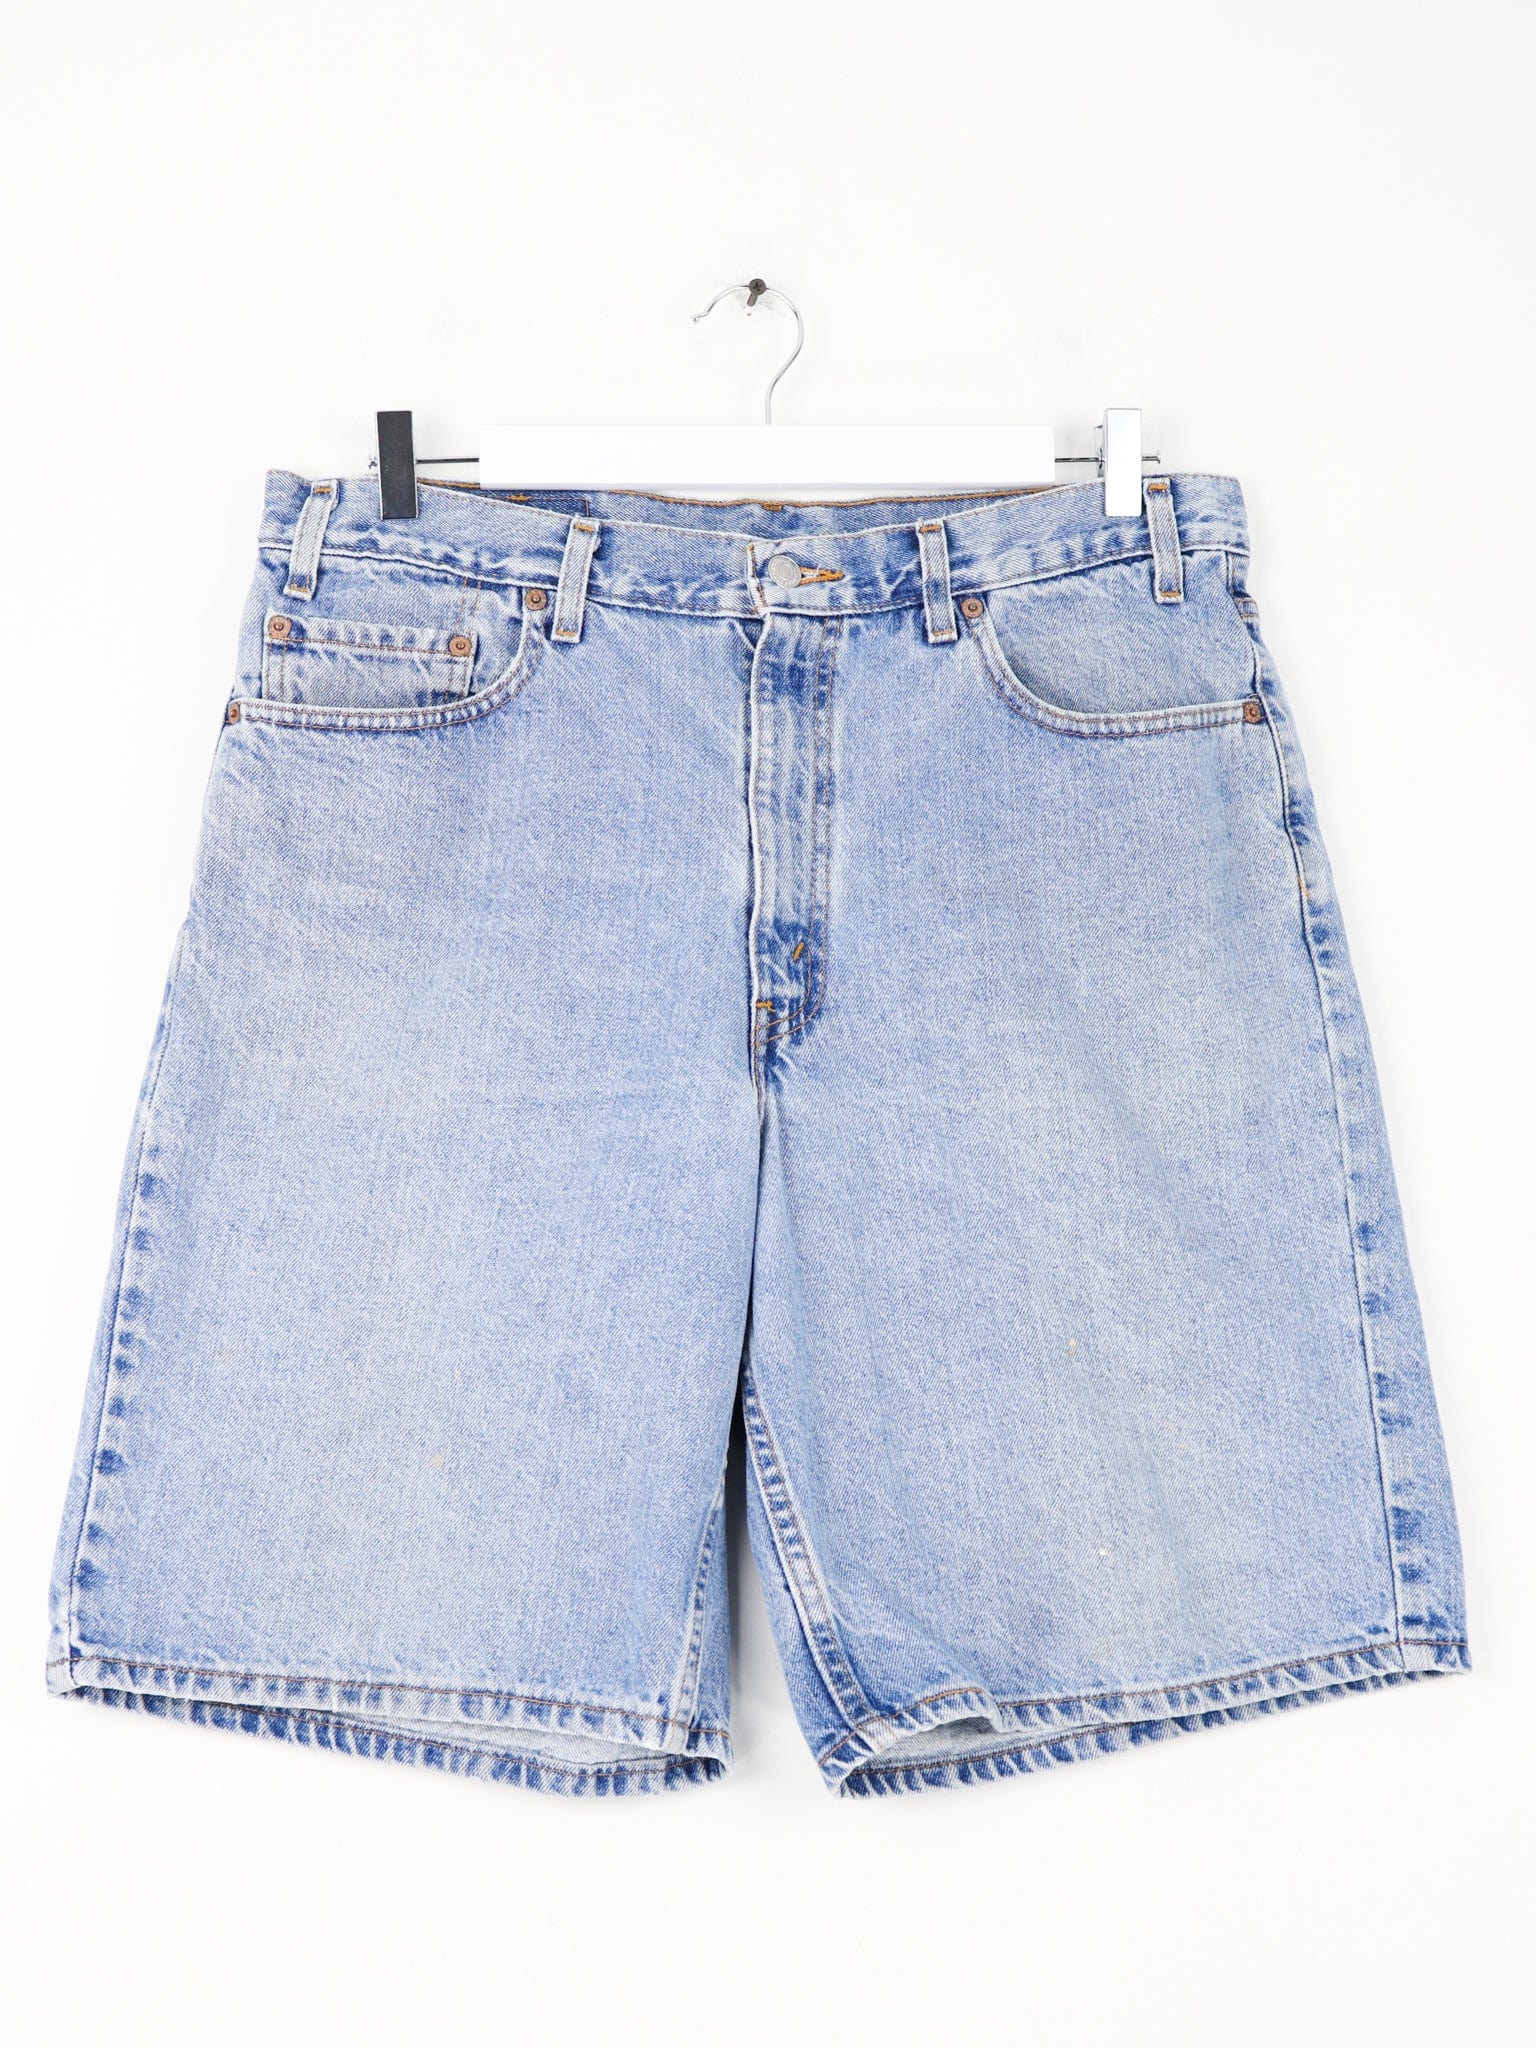 Vintage Levi's 550 Relaxed Fit Denim Shorts Size 36